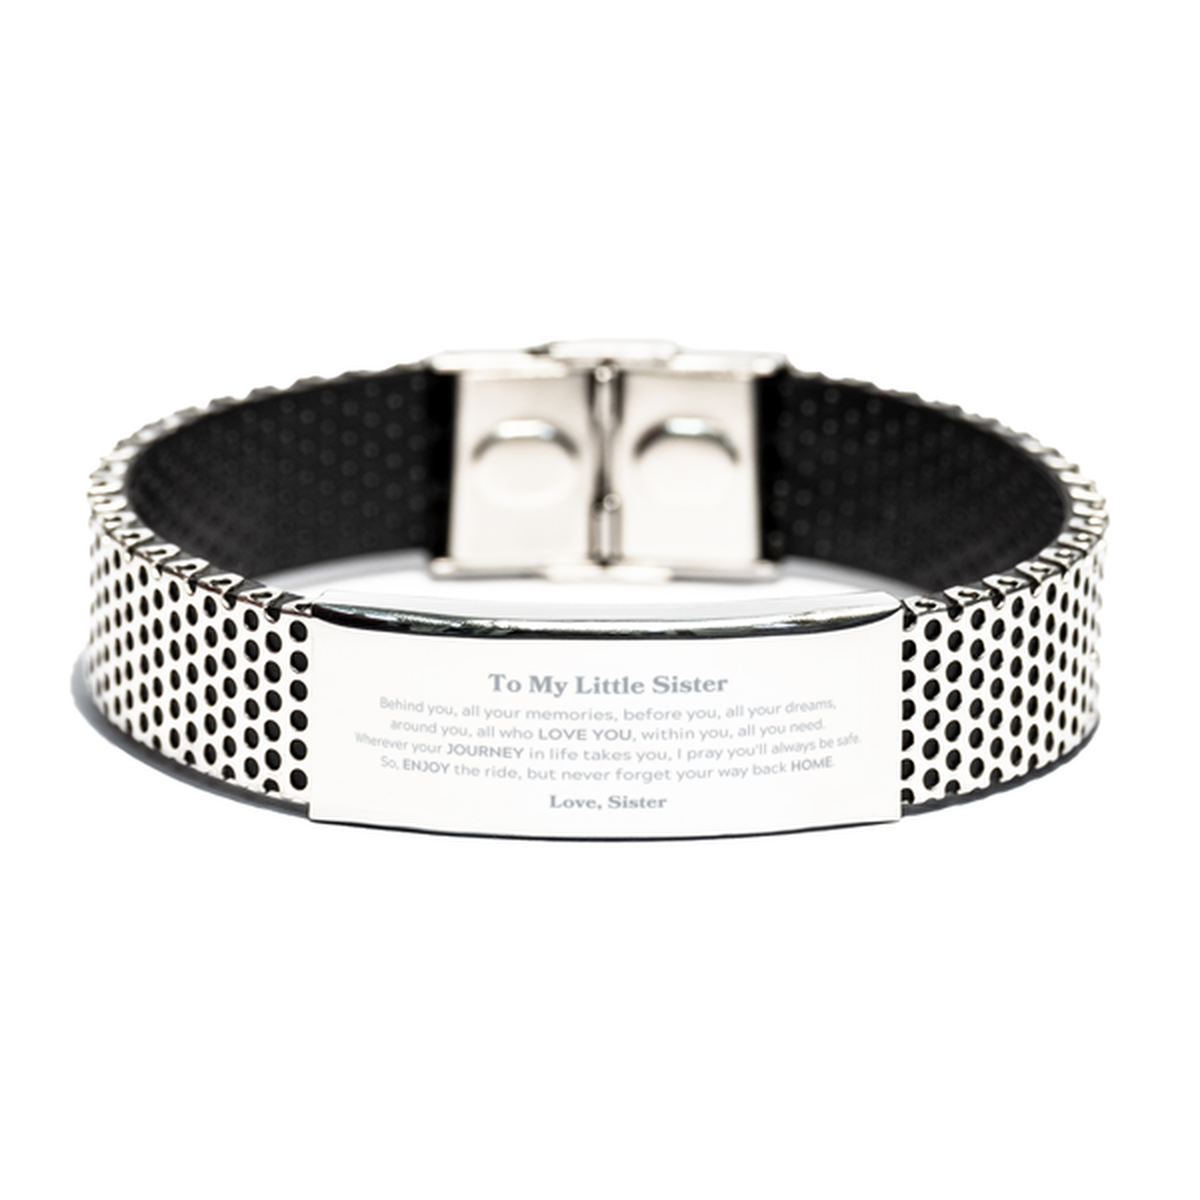 To My Little Sister Graduation Gifts from Sister, Little Sister Stainless Steel Bracelet Christmas Birthday Gifts for Little Sister Behind you, all your memories, before you, all your dreams. Love, Sister